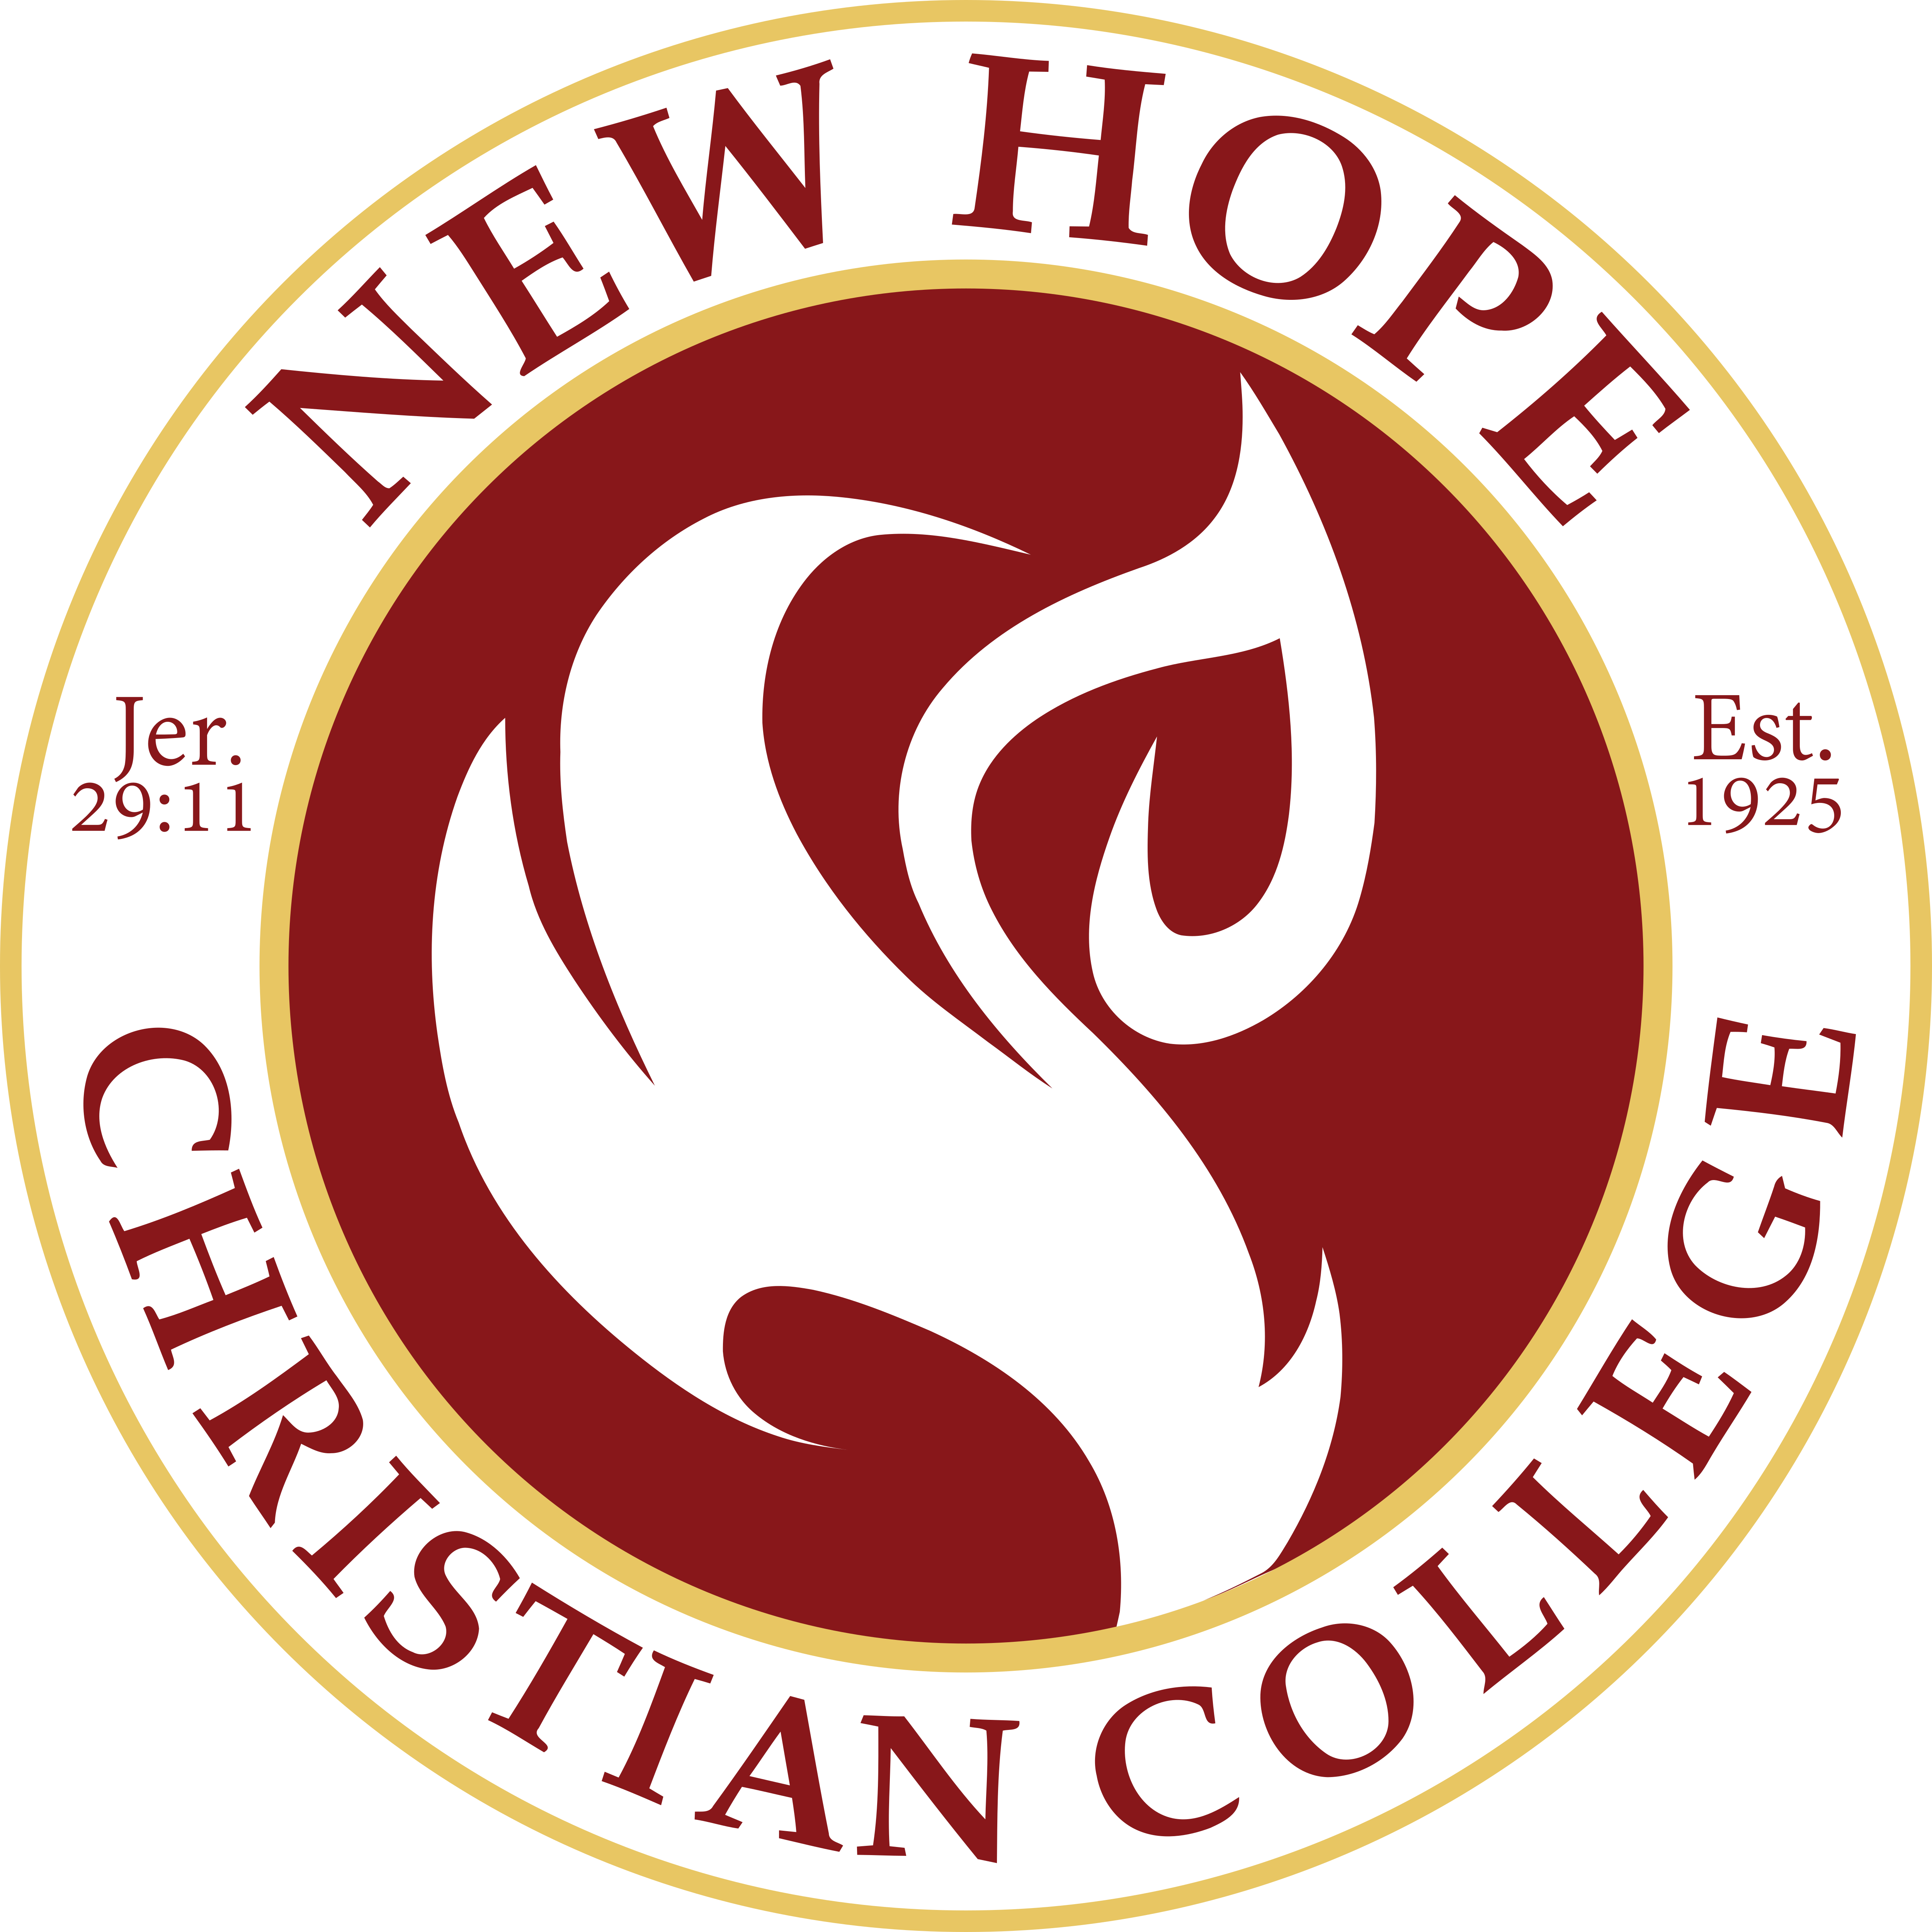 New Hope Christiann College - Logos Download